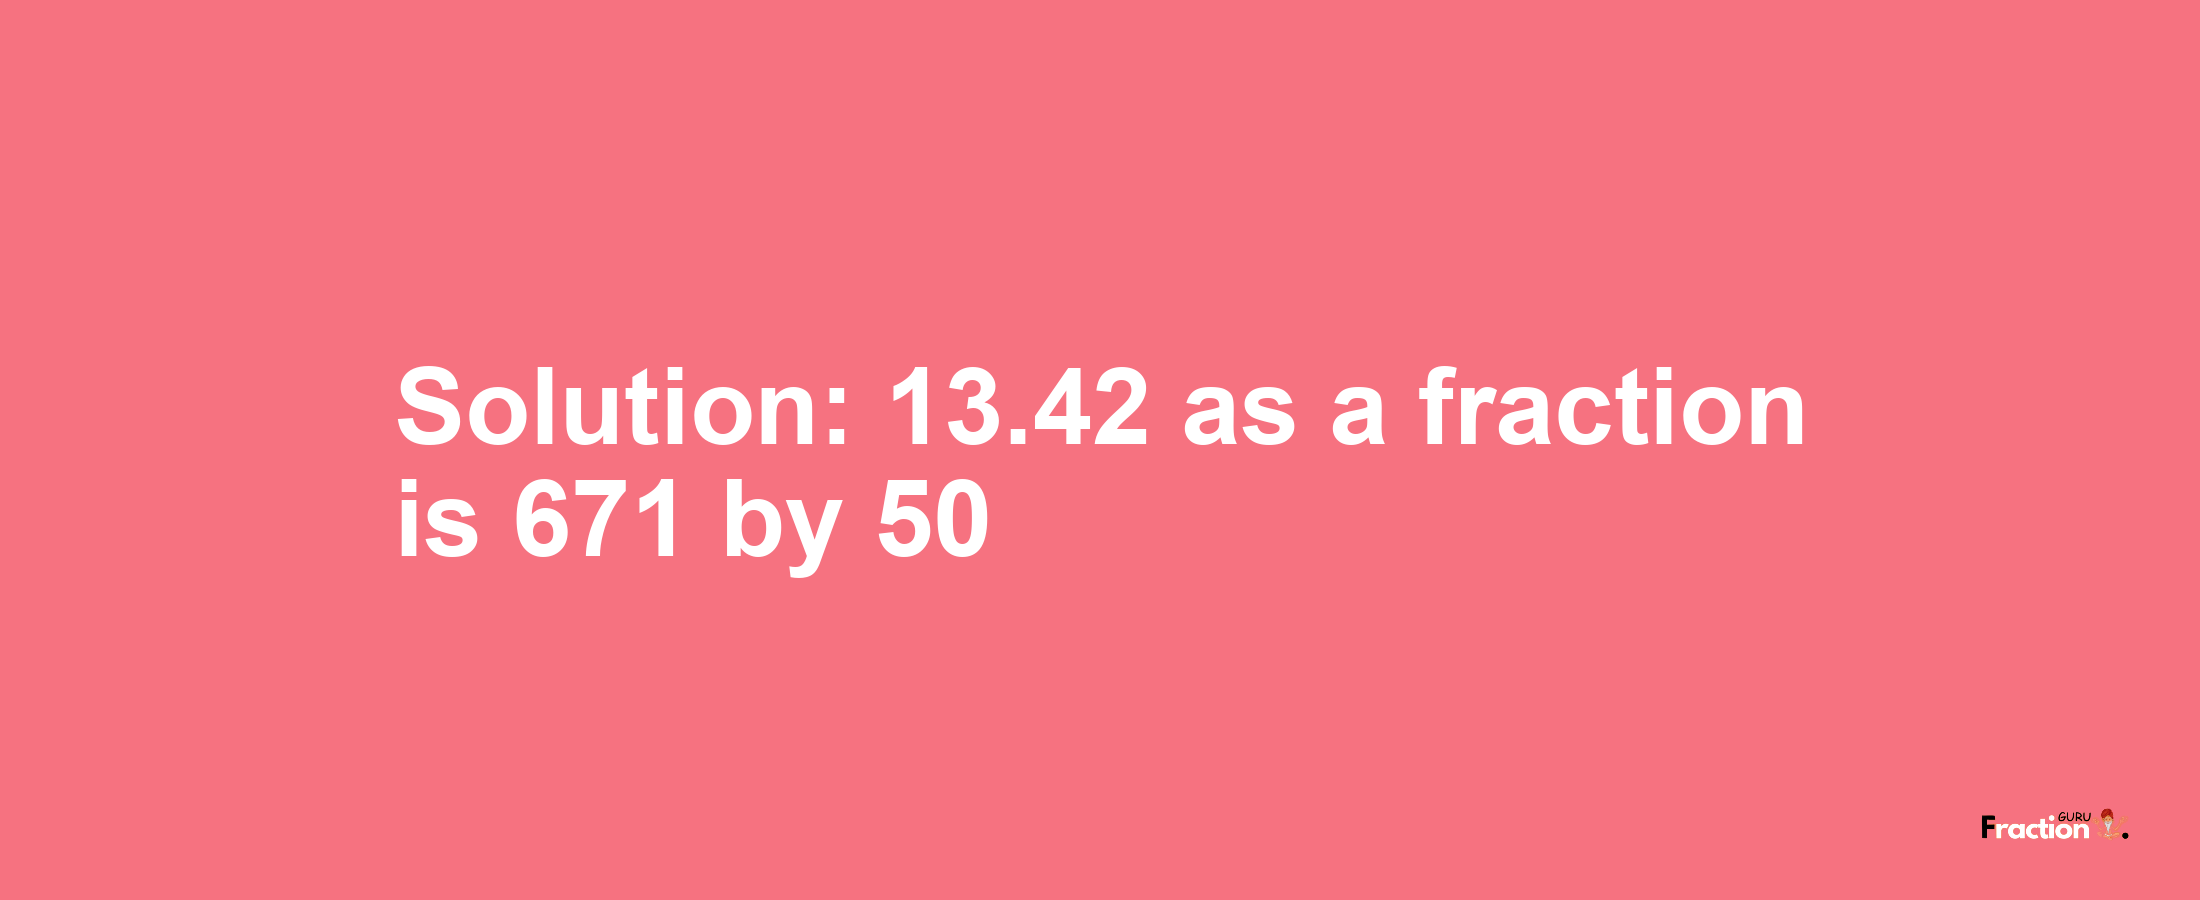 Solution:13.42 as a fraction is 671/50